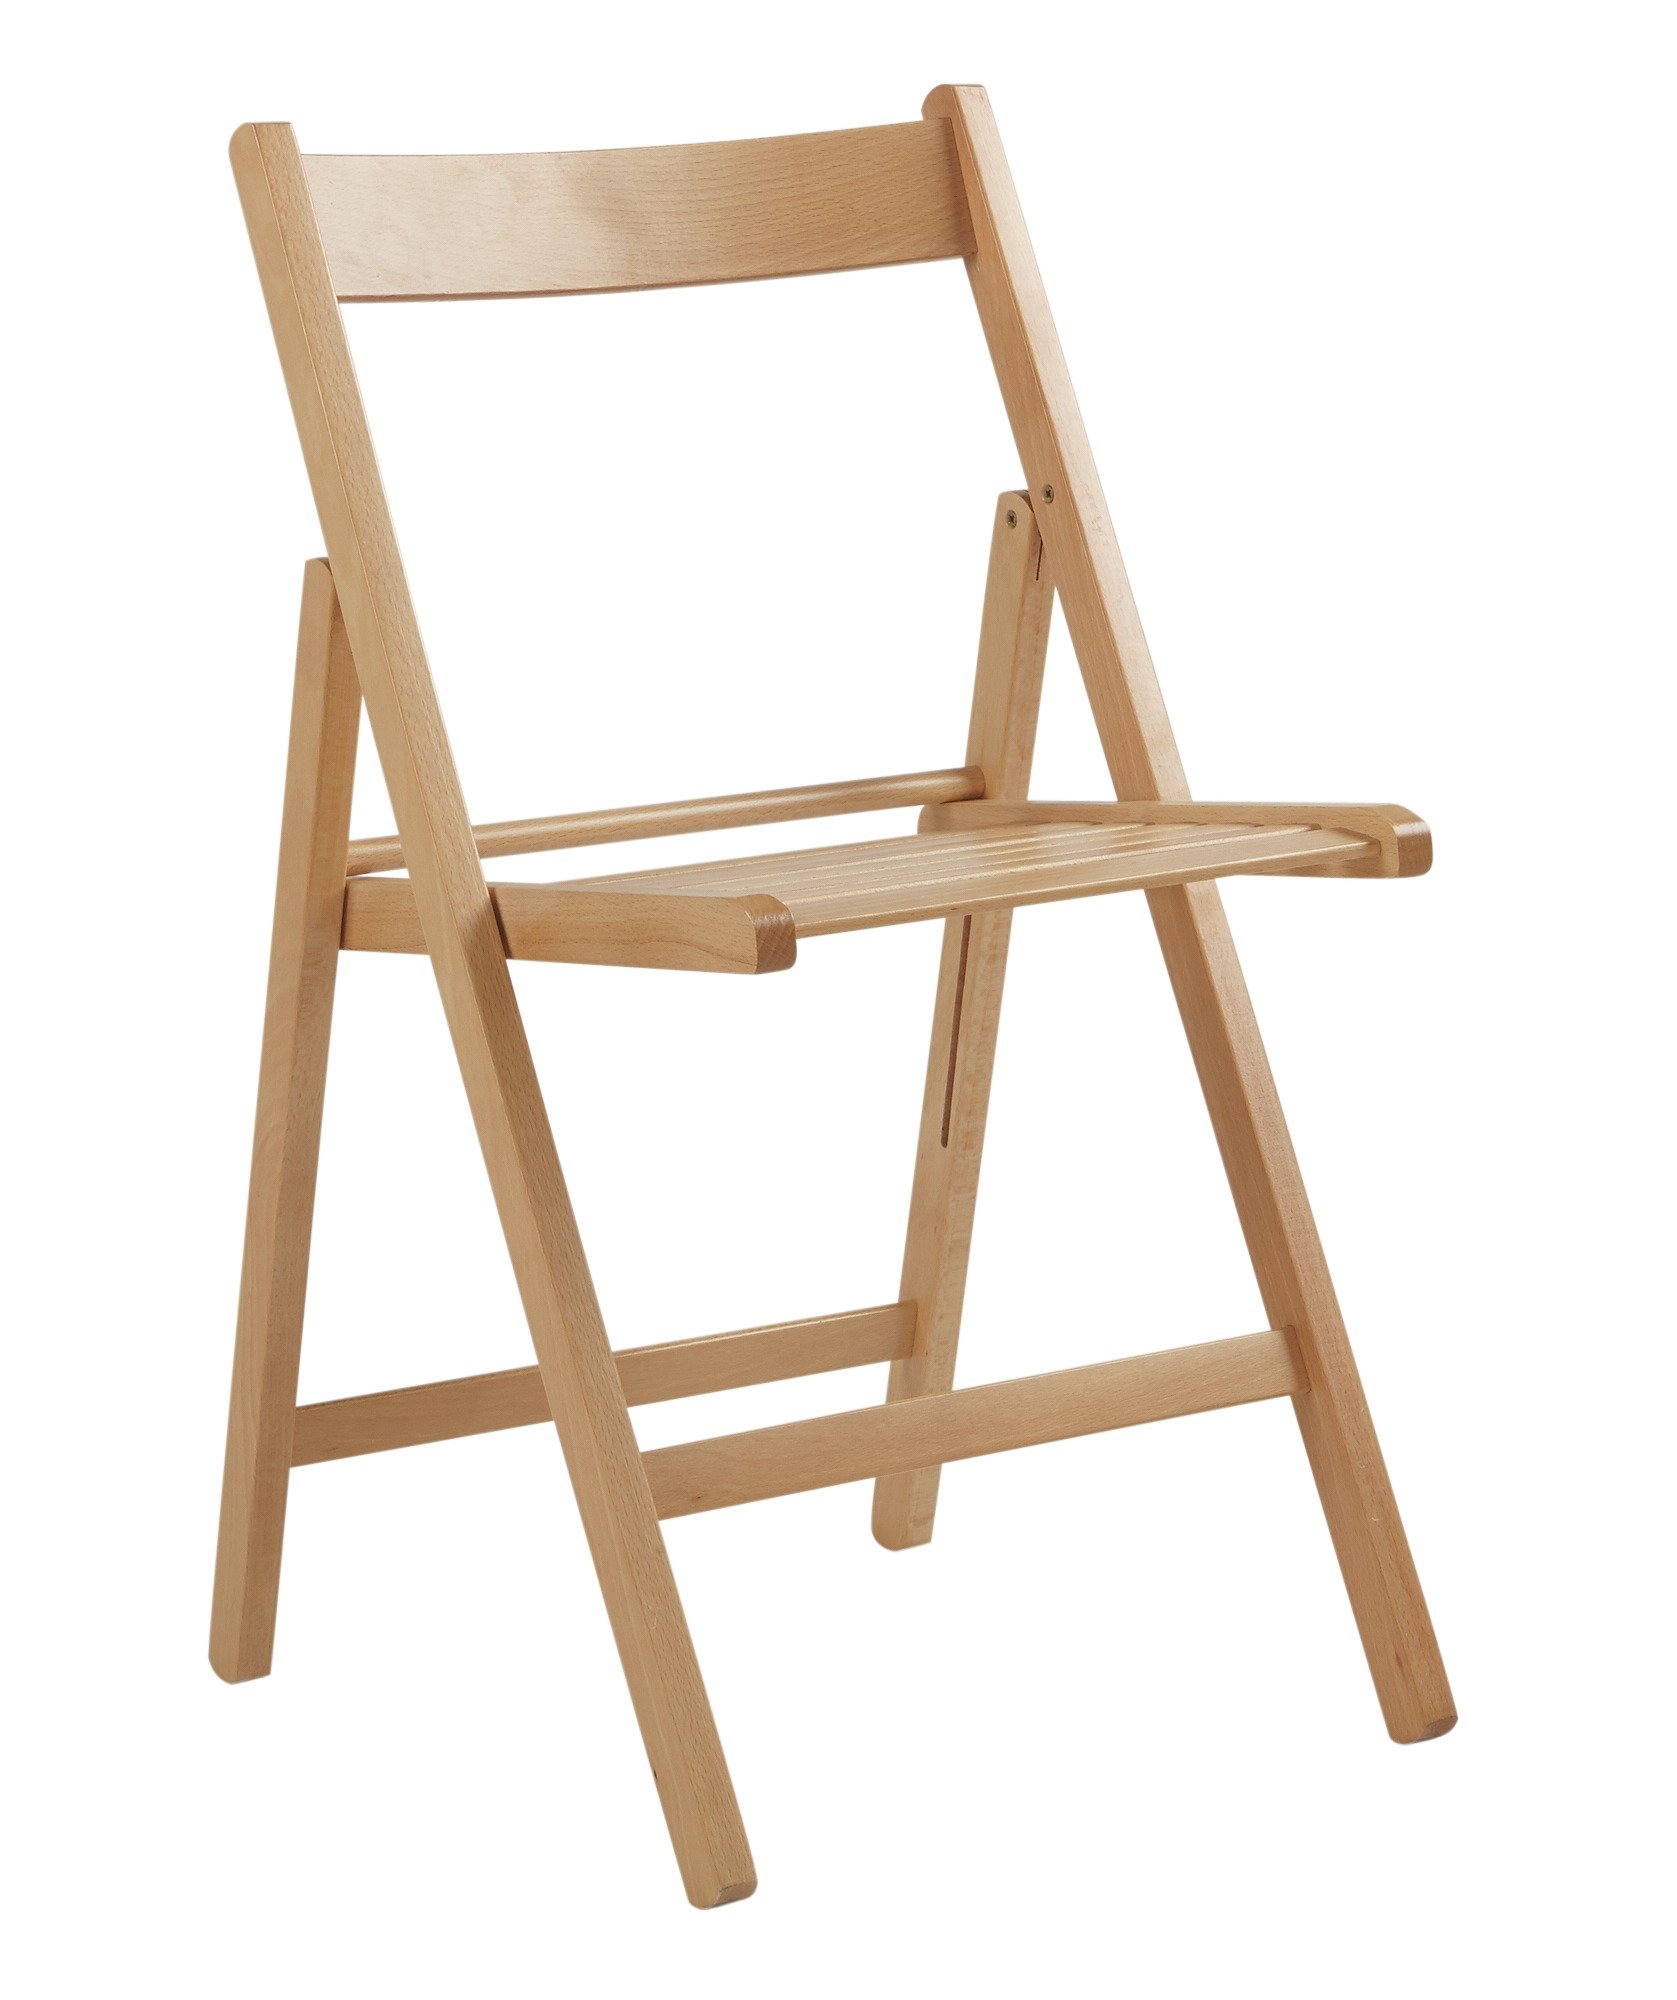 4 wooden folding chairs